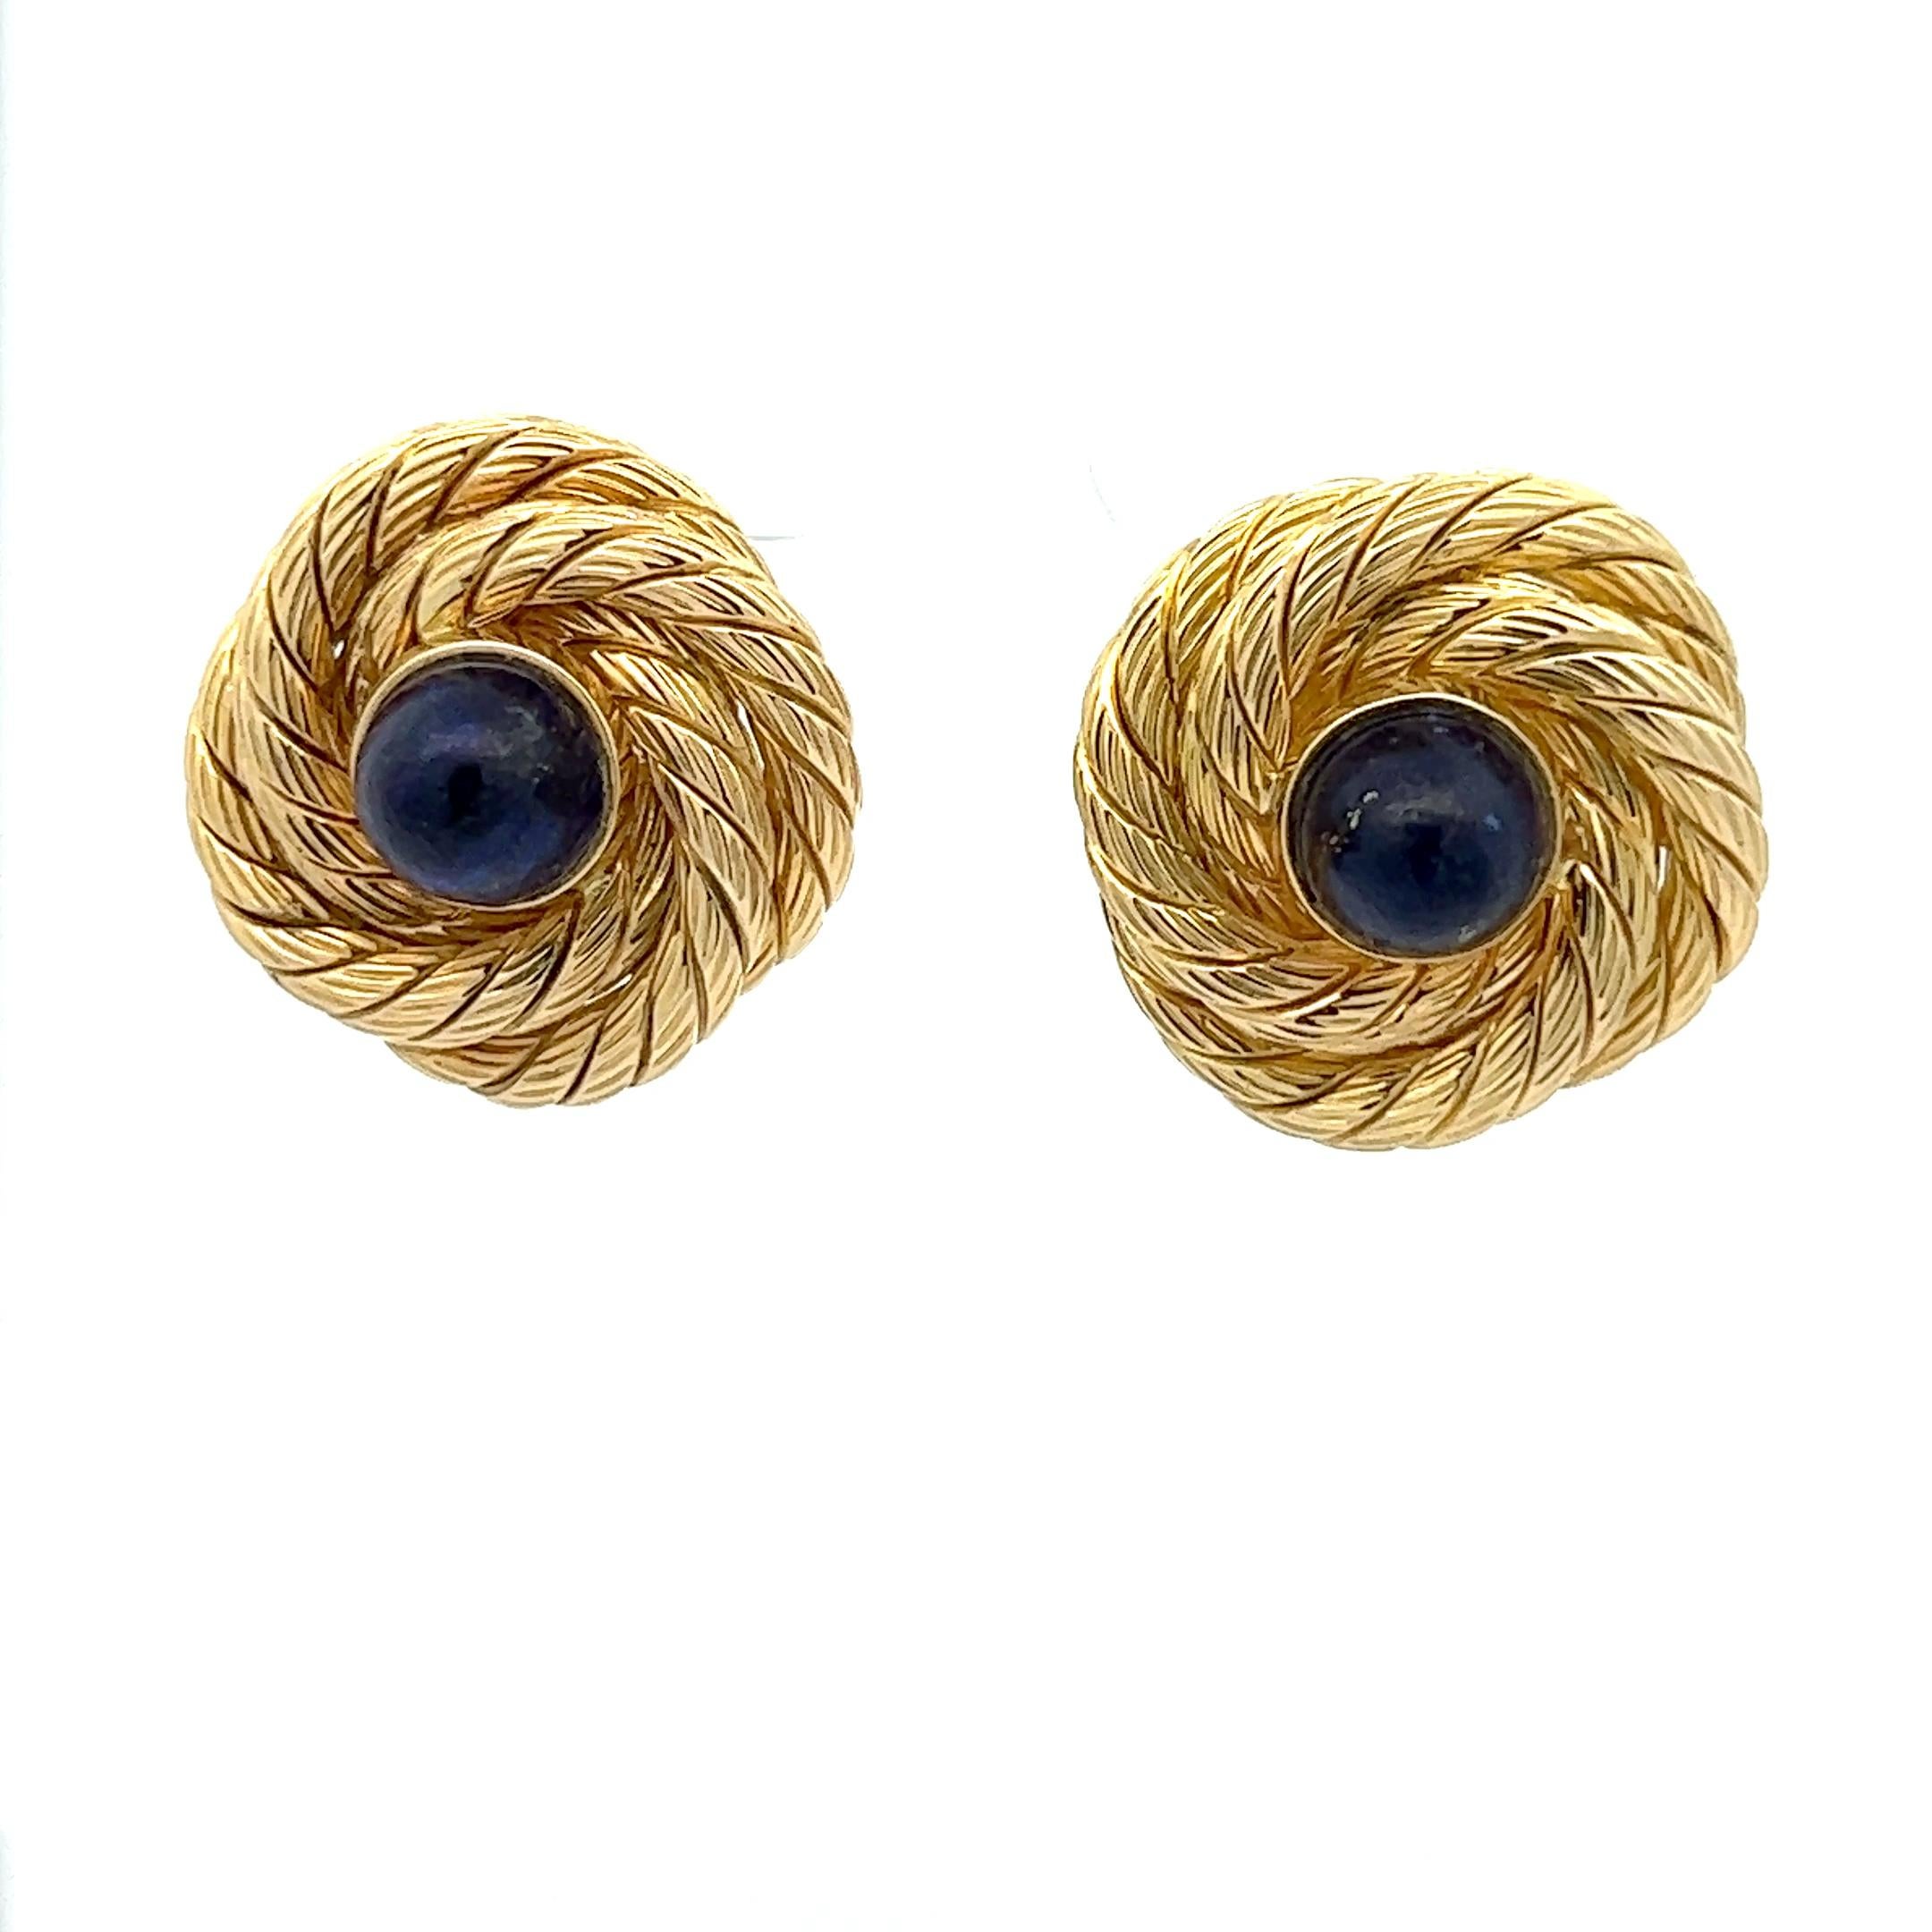 Women's A pair of 18k yellow gold and Lapis Lazuli earrings by Weingrill.